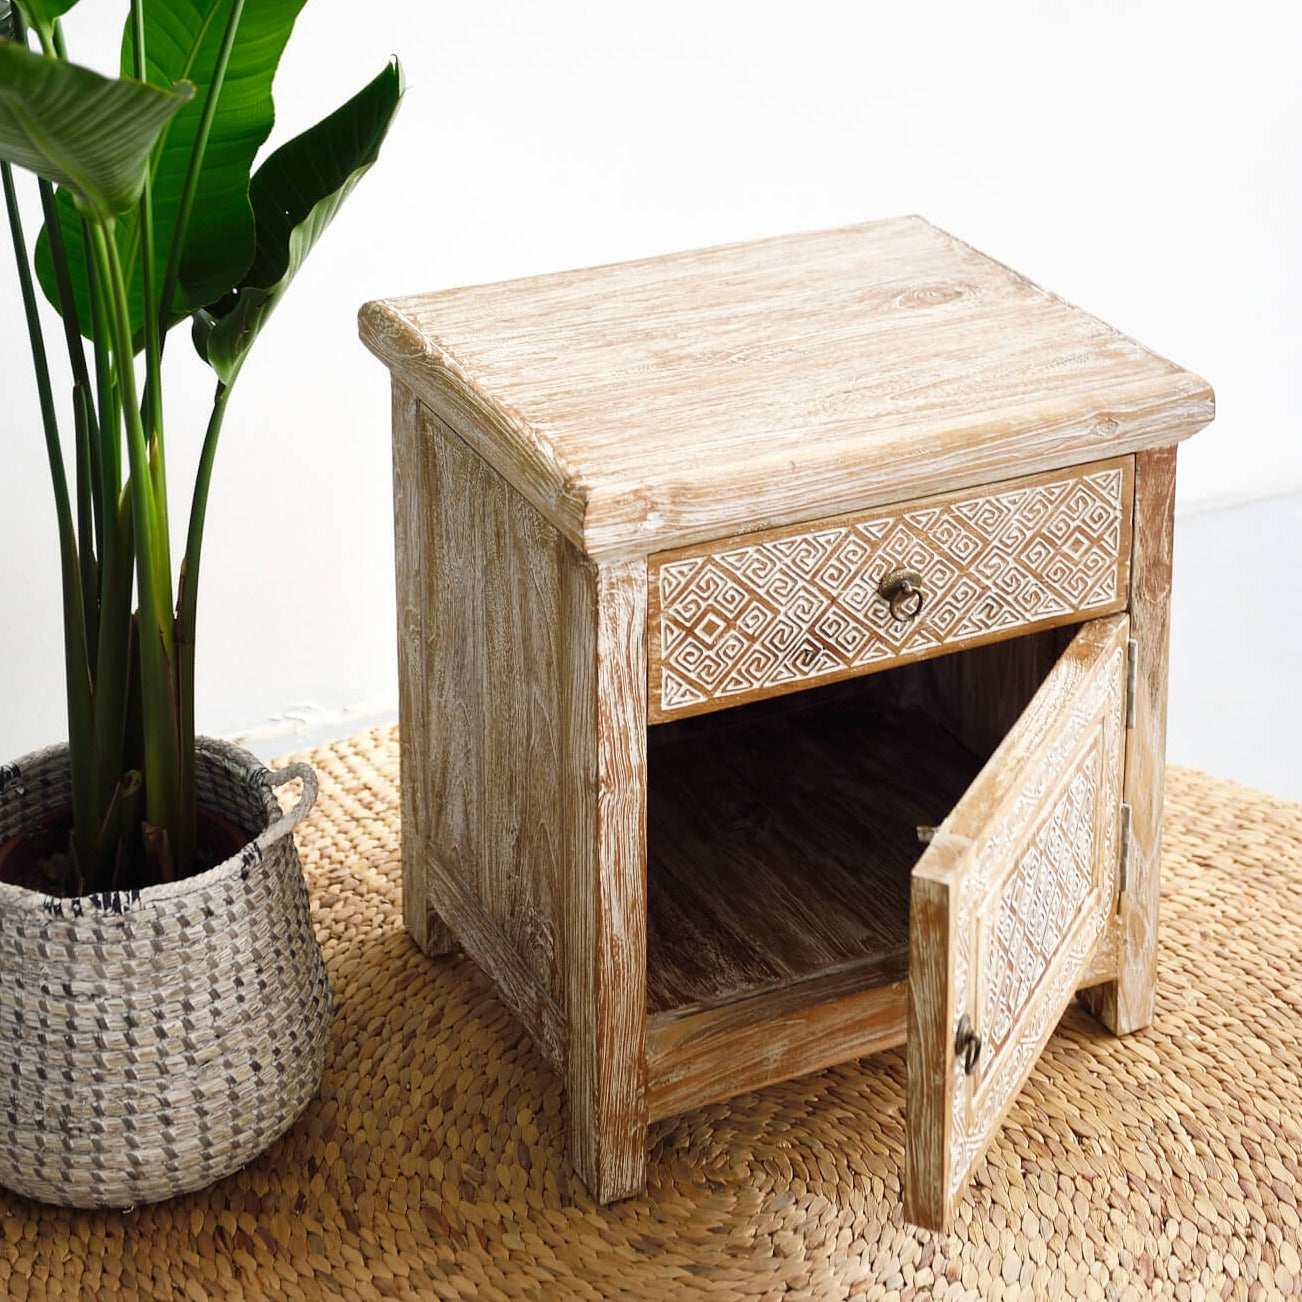 Tribal Bedside Table - White Wash